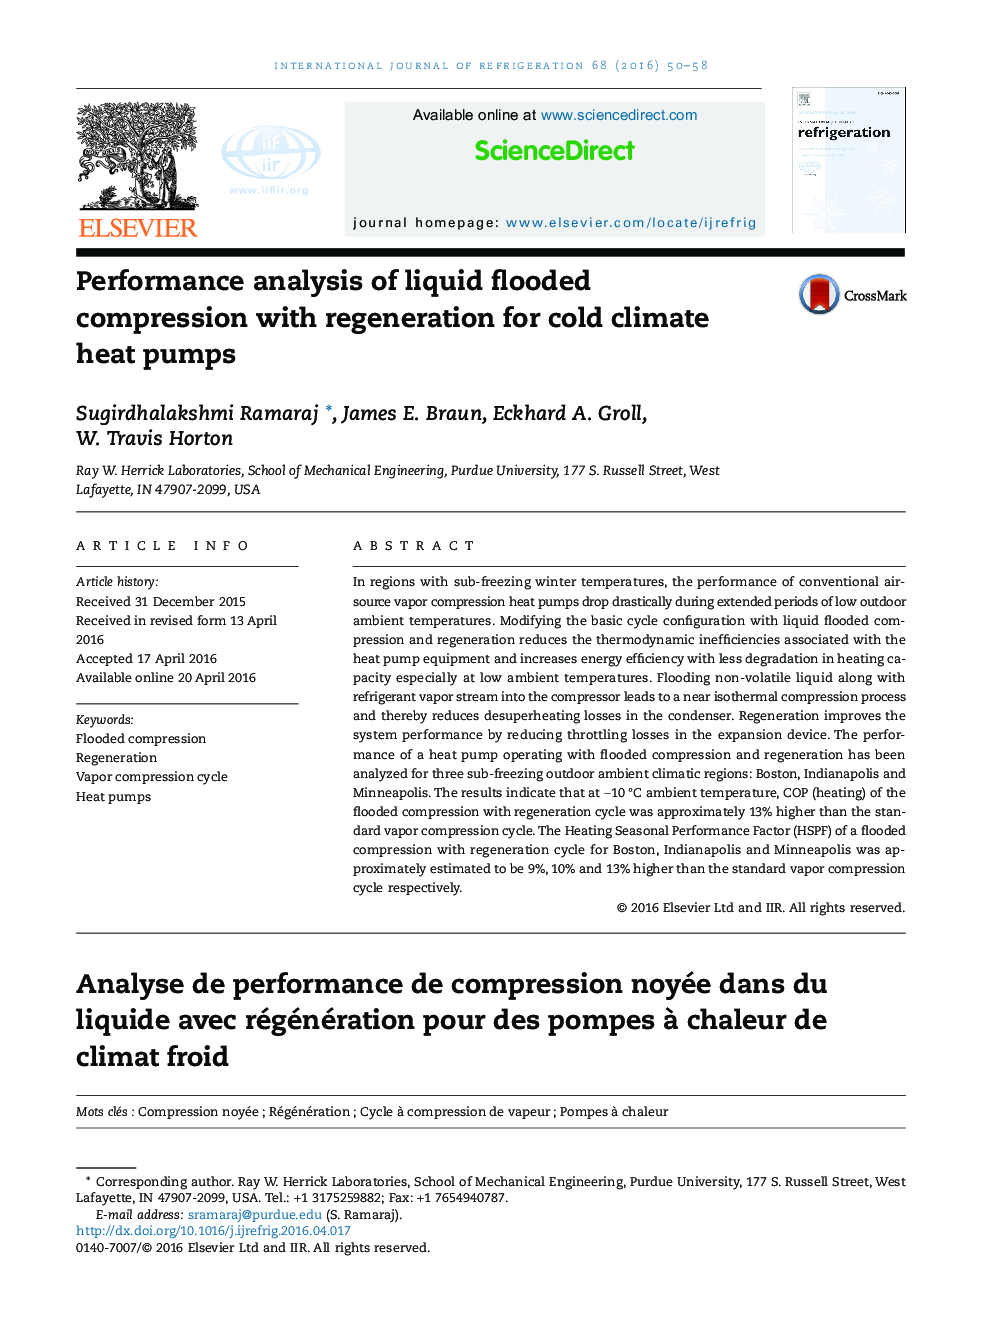 Performance analysis of liquid flooded compression with regeneration for cold climate heat pumps